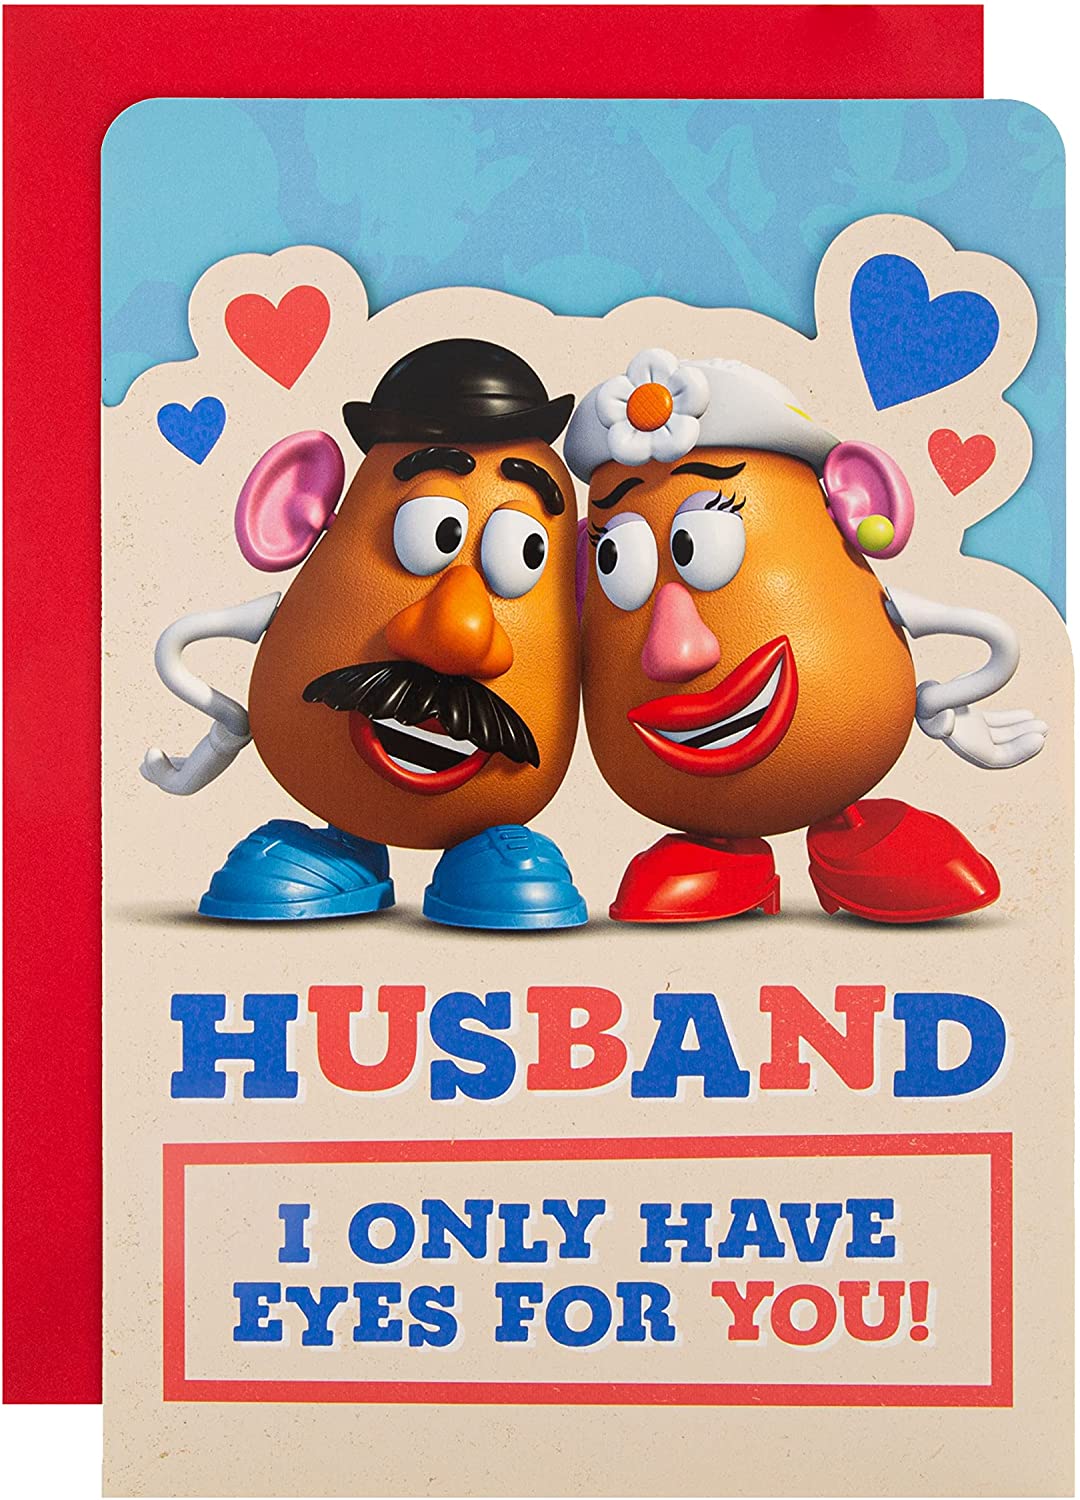 Mr. Potato Head Toy Story Gifts, Toy Story Accessories, Pins